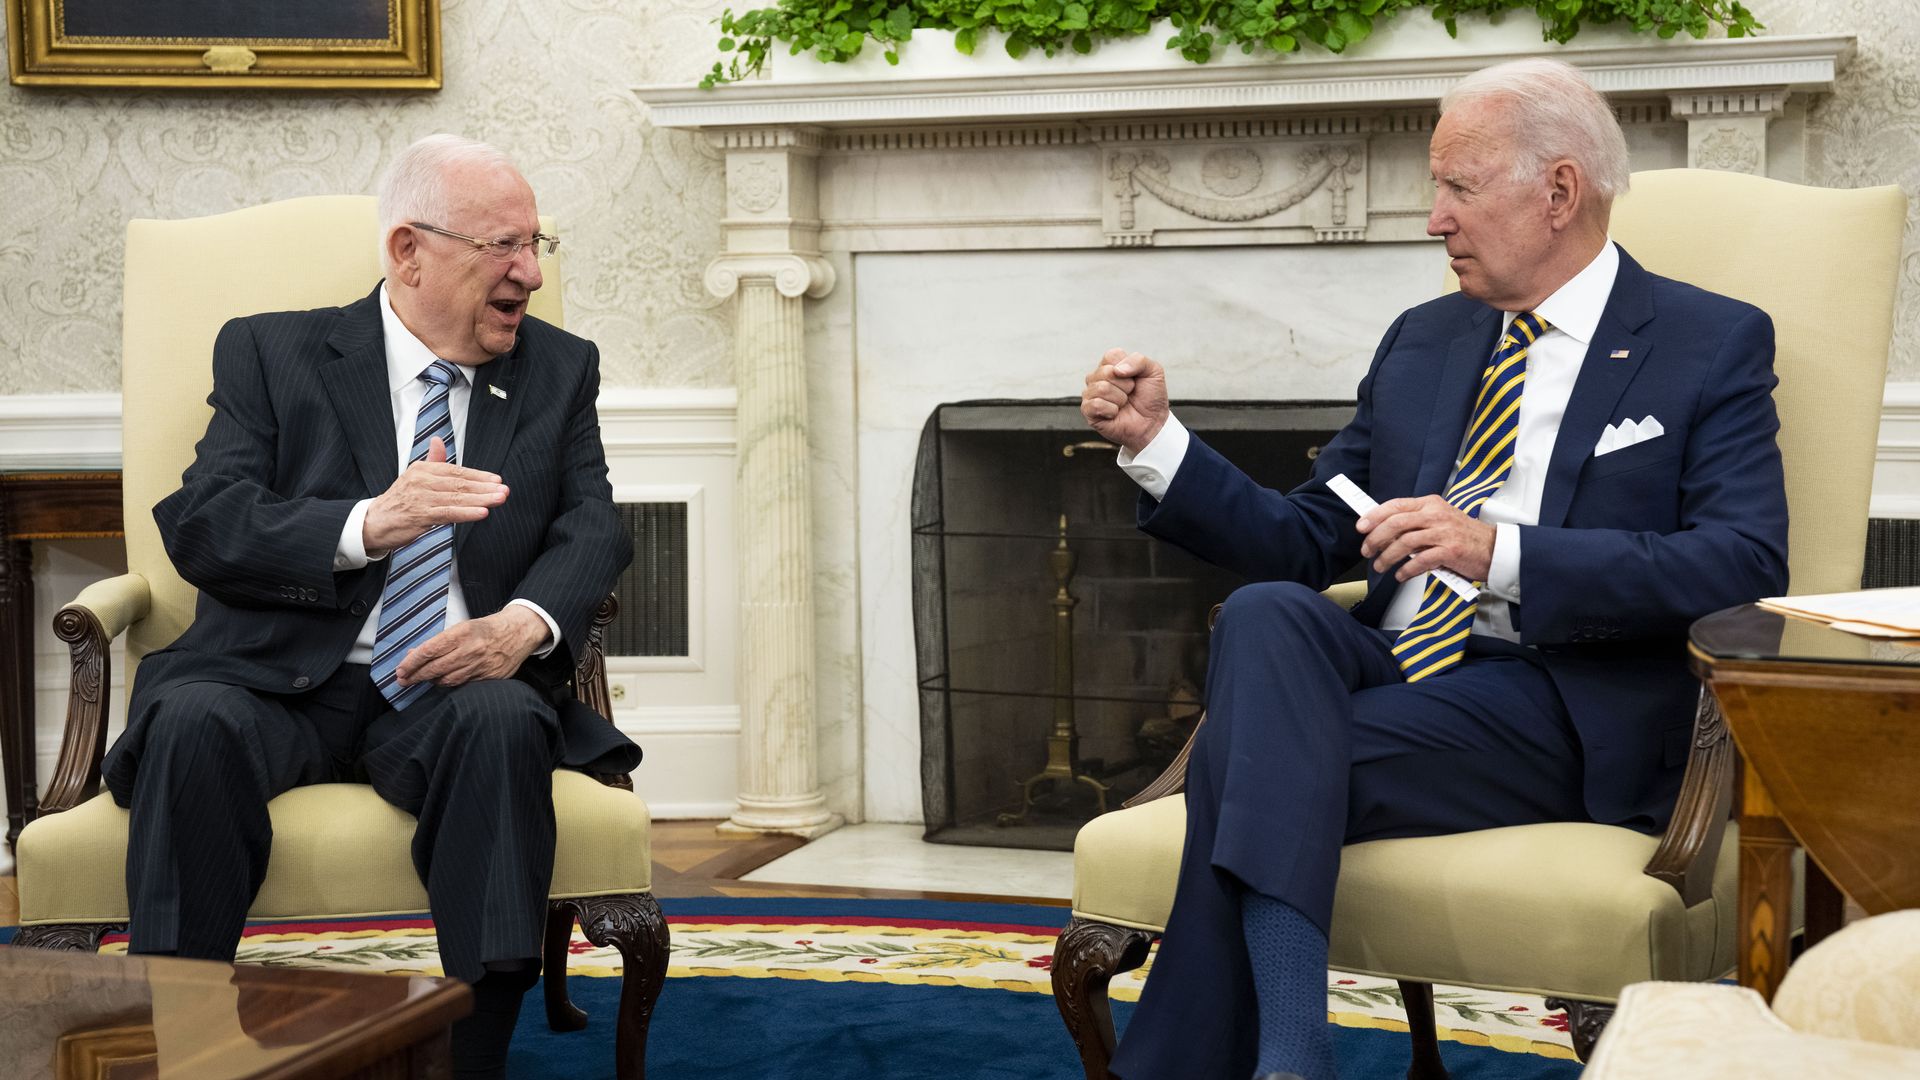 Biden meets with Reuven Rivlin at the White House